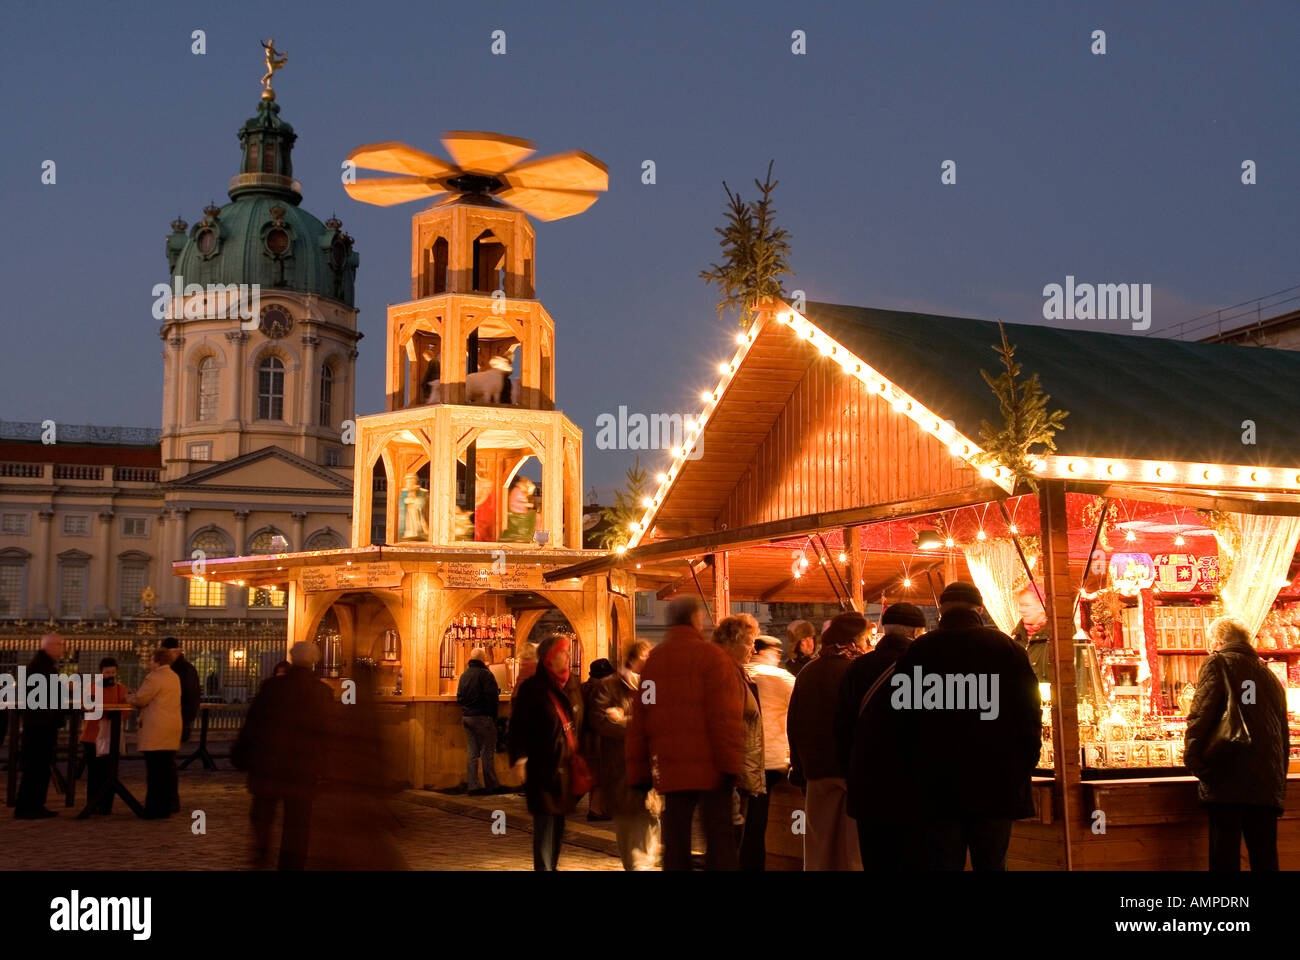 Germany Capital Berlin The first Christmas market in front of the Charlottenburg Palace the summer residence of the Prussian Stock Photo